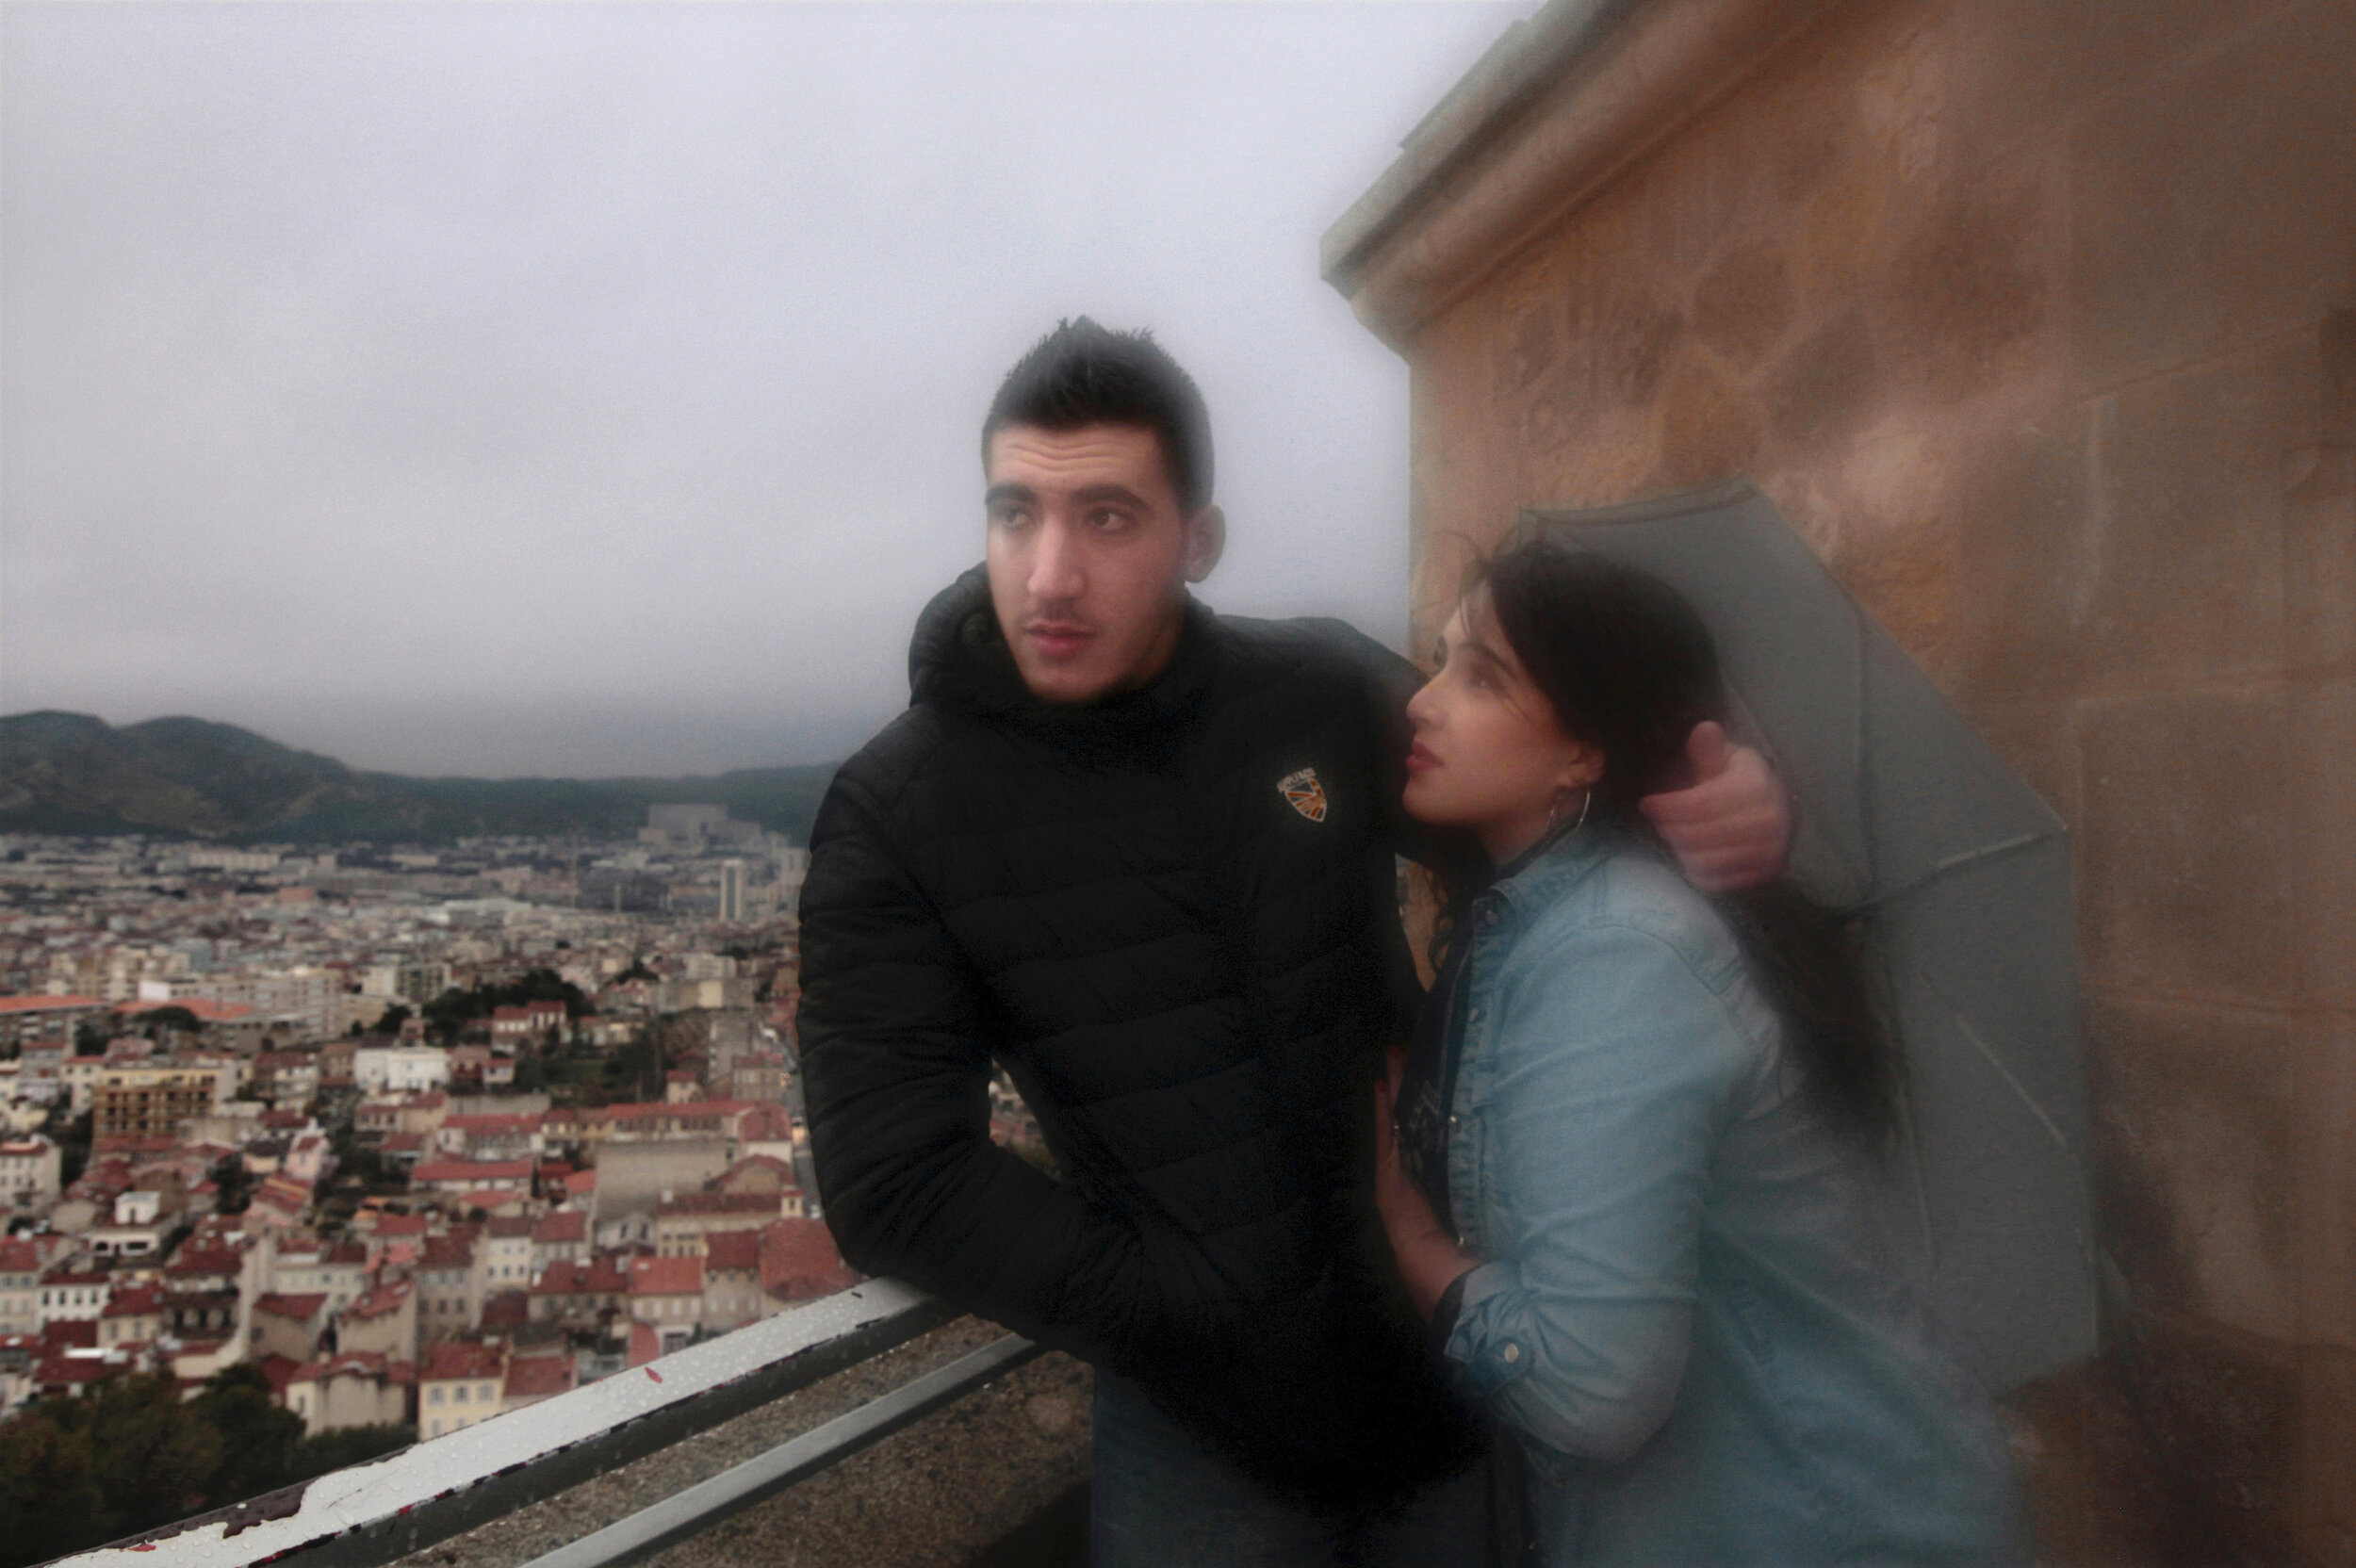   France. Marseille. 2013. Mehdy Bibi [left] meets his girlfriend at Notre-Dame de la Garde. They have known each other for five years and want to get married. But their families, for reasons undisclosed, have been opposing their marriage and have as